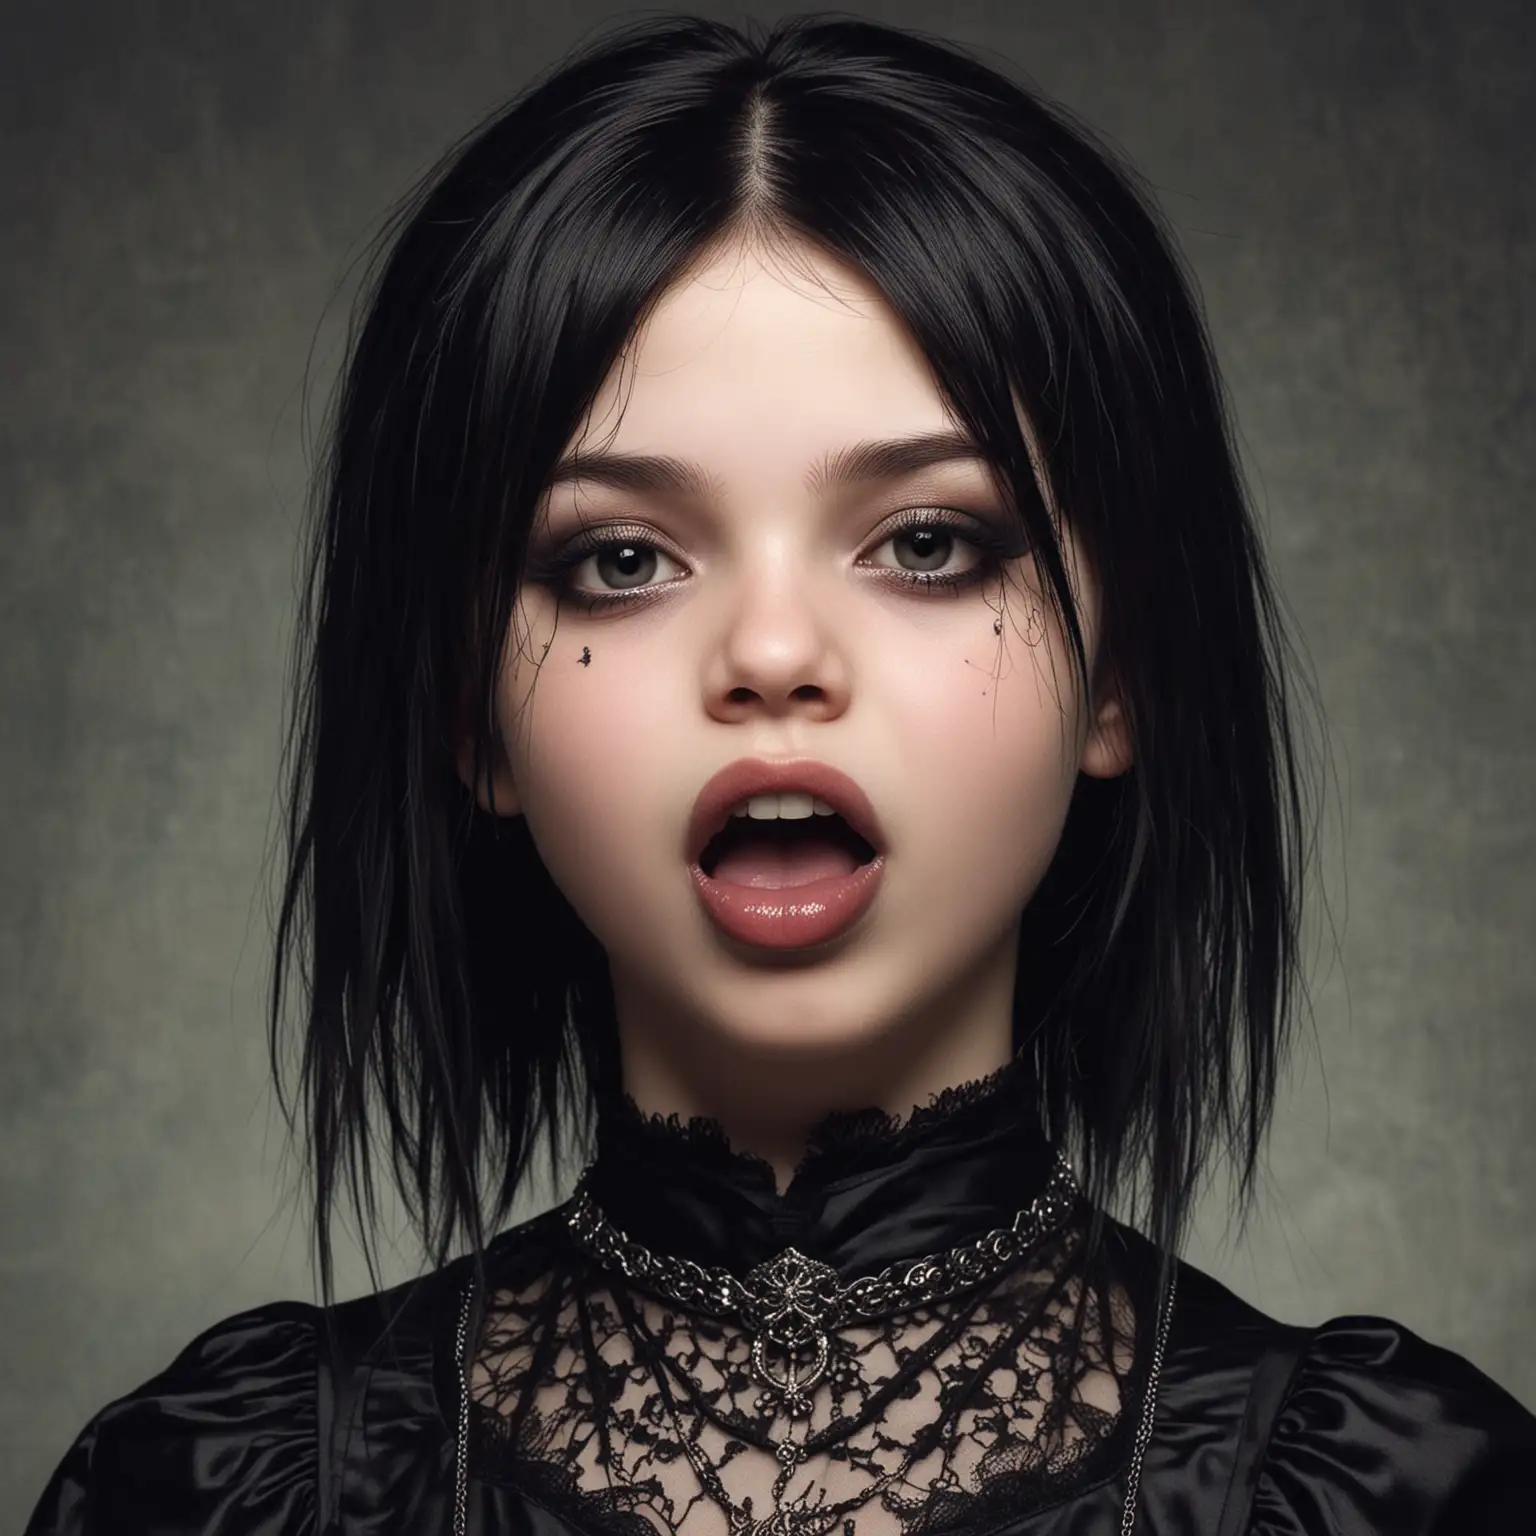 9 year old goth princess, "mouth closed", tongue out, full profile